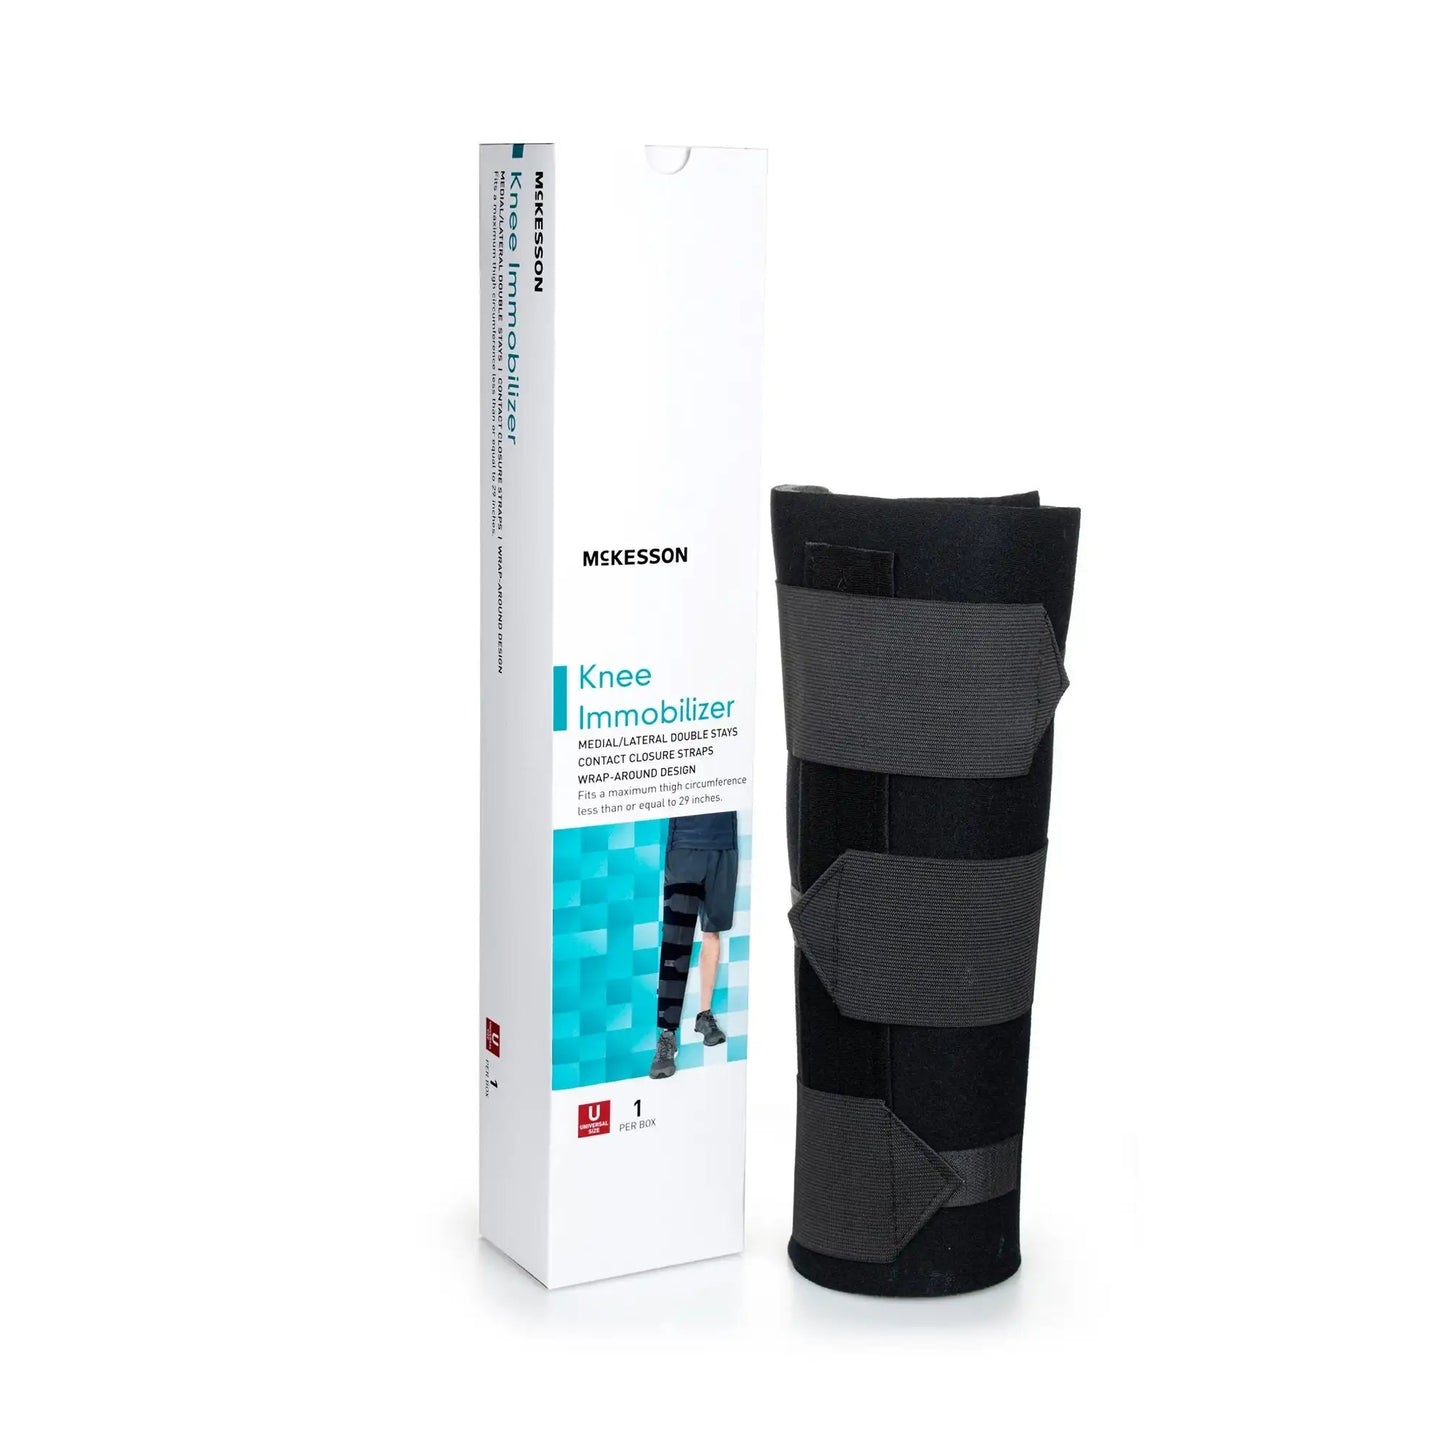 McKesson Knee Immobilizer, 16-Inch Length, One Size Fits Most